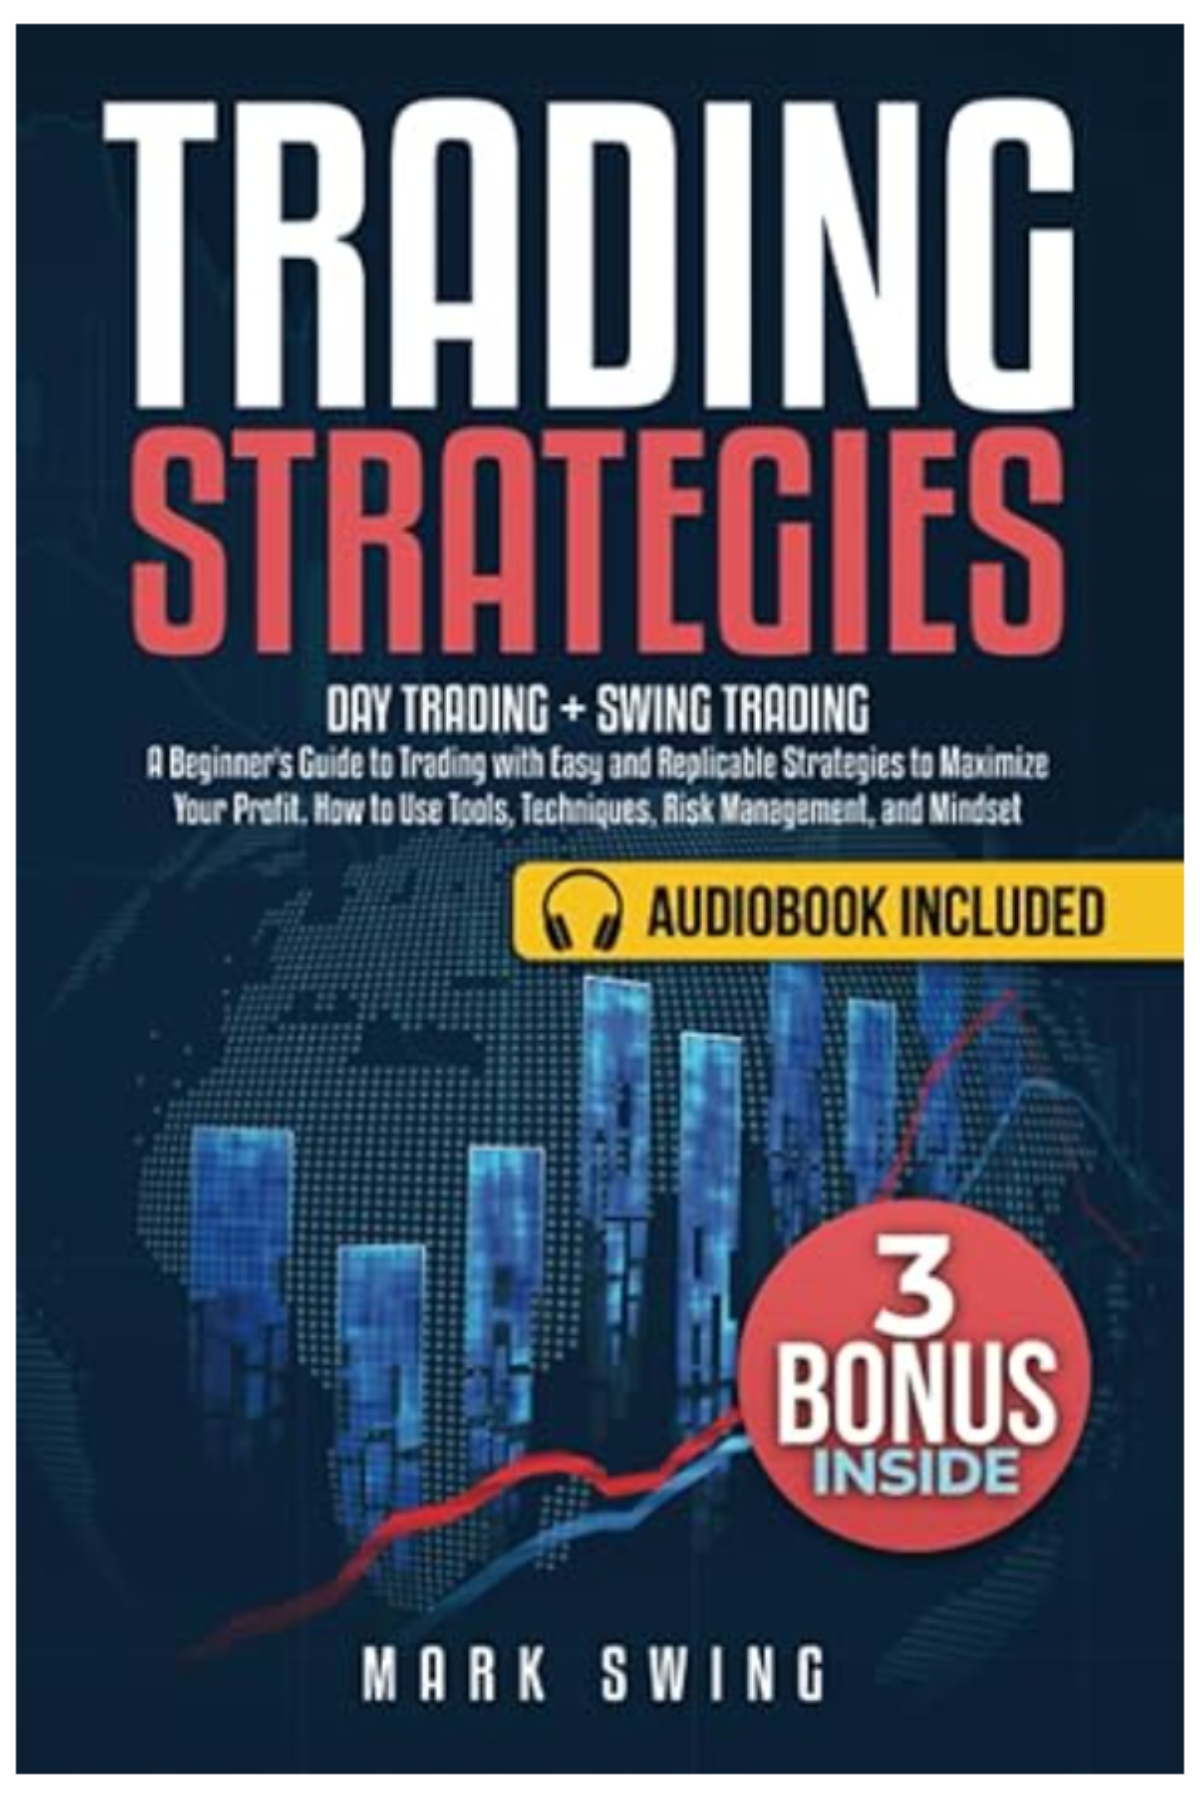 Leading strategy book for forex traders